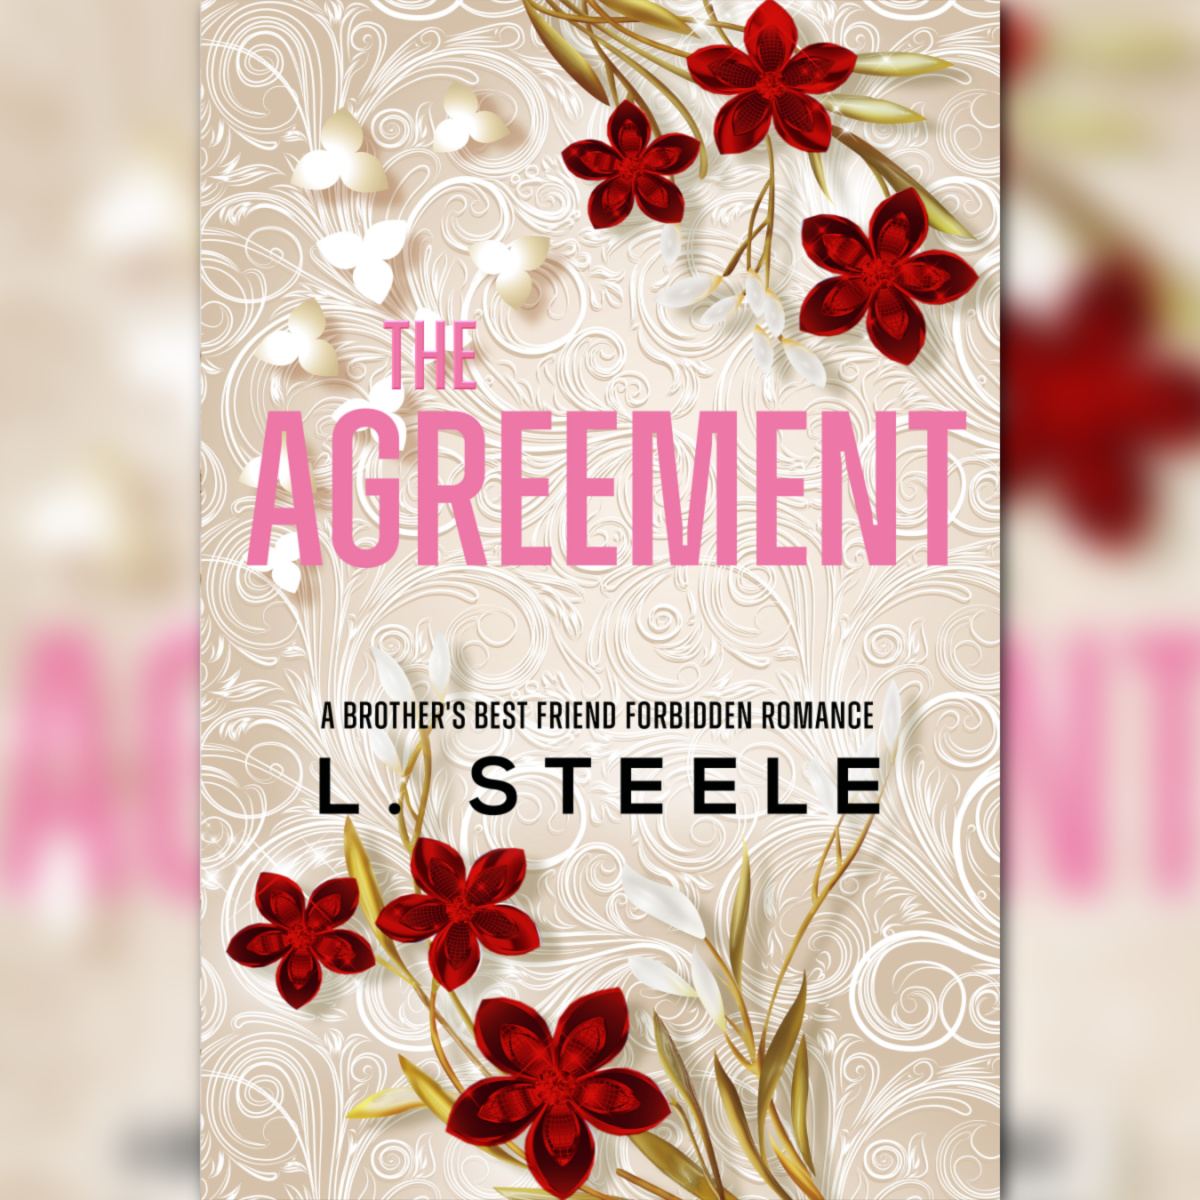 The Agreement by L. Steele releases on February 14th!

geni.us/TheAgreement
FREE on Kindle Unlimited

@ElleWoodsPR  @Author_L_Steele 
#SteamyRomance #RomanceNovel #Bookstagram #RomanceBook #LSteele #AlphaHero #BrothersBestFriendRomance #OfficeRomance #FakeMarriageRomance